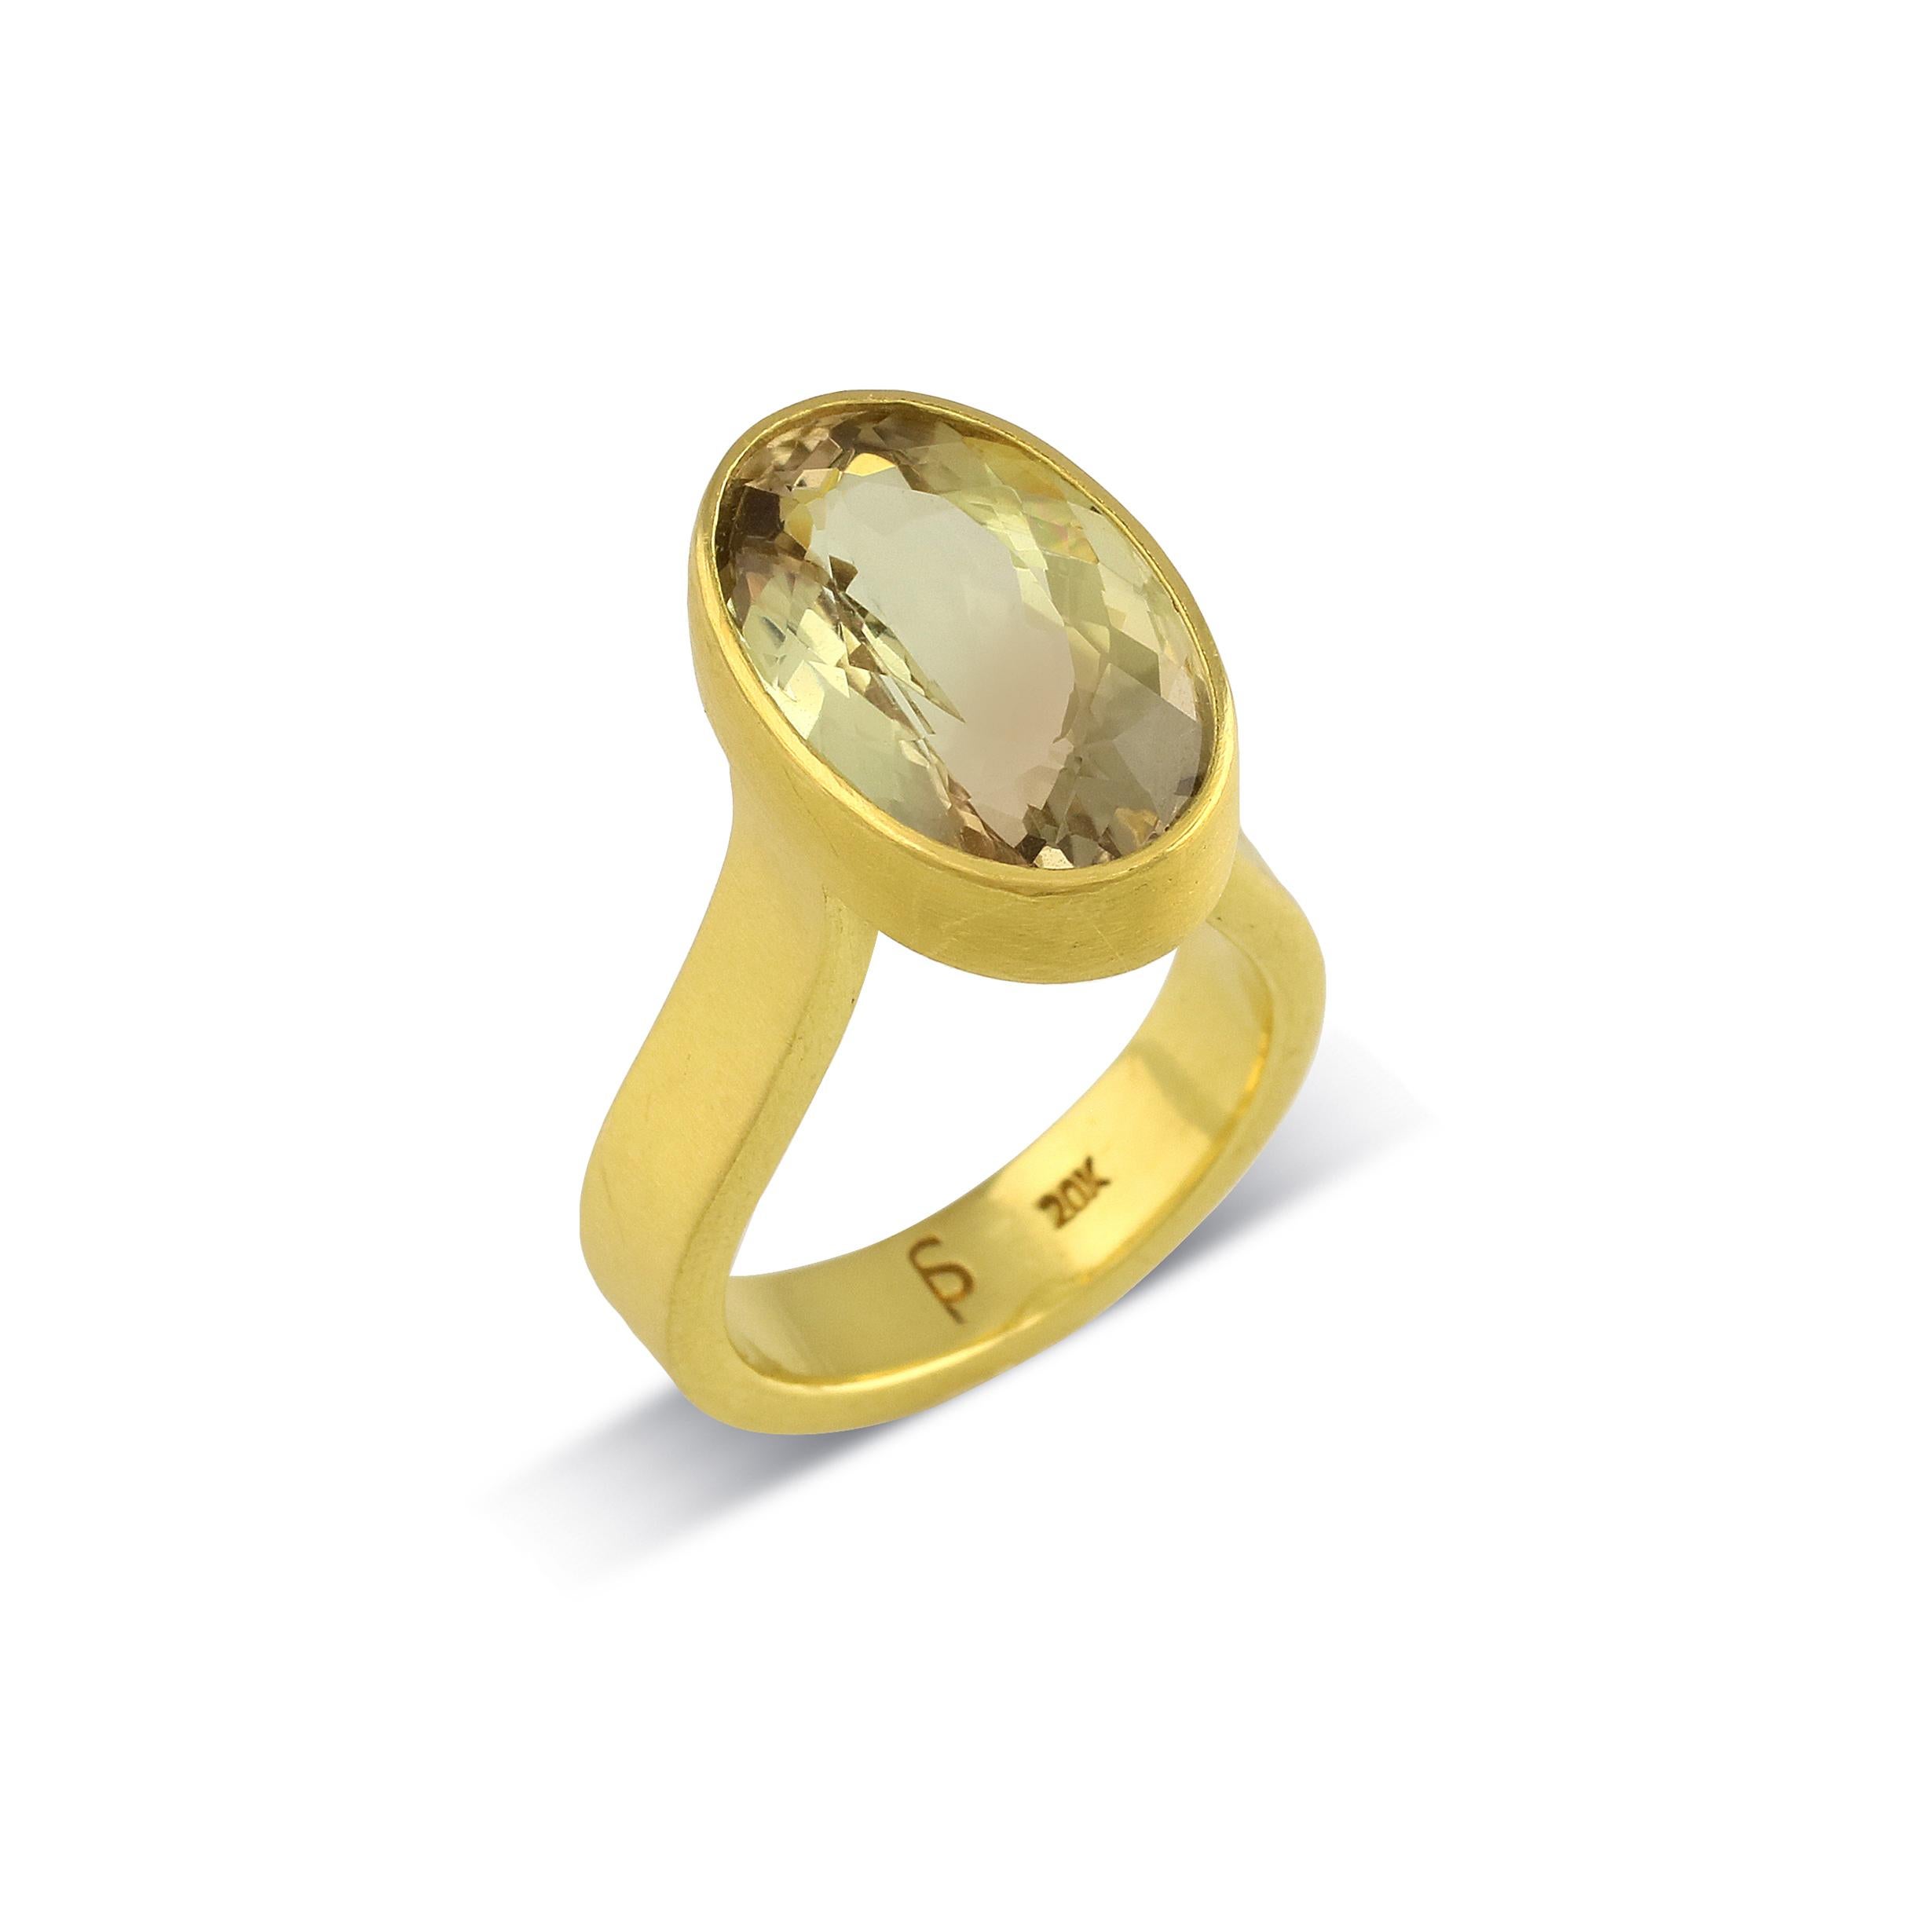 Artisan PHILIPPE SPENCER 11.1 Ct. Bi-Color Tourmaline set in 22K Gold Statement Ring For Sale